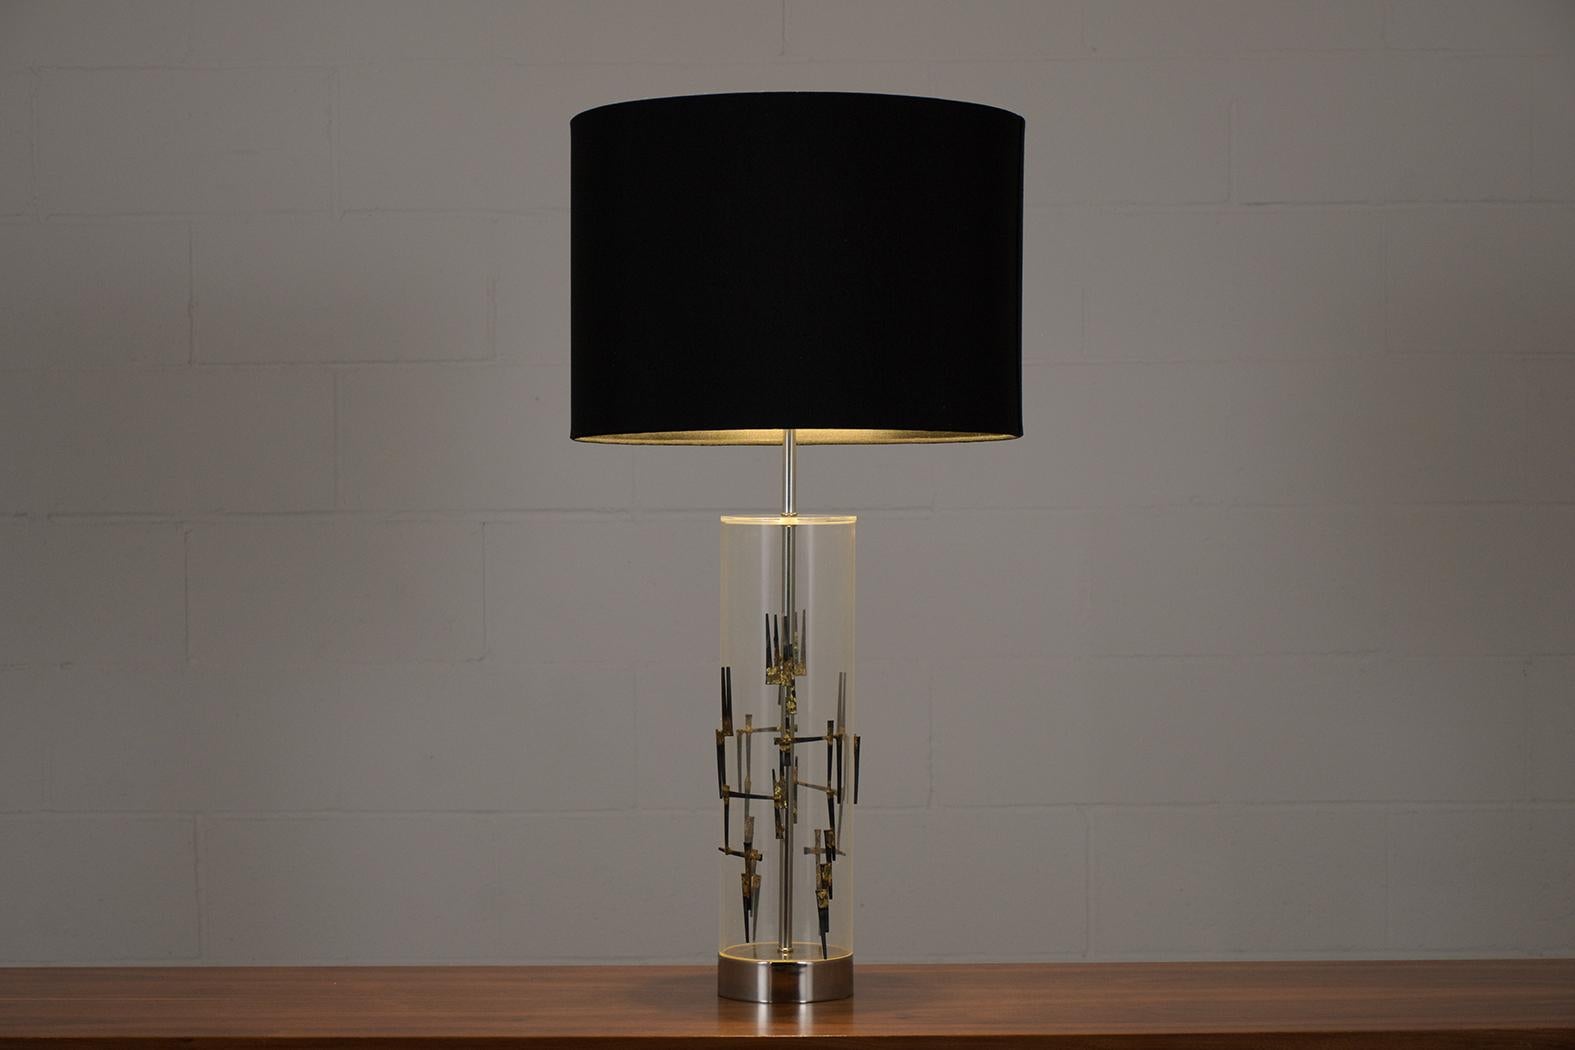 An extraordinary vintage mid-century modern lucite table lamp in great condition and newly restored by our team of expert craftsmen. The lamp is beautifully crafted out of lucite accentuated by sculptural ornaments making, has a sleek Brutalist